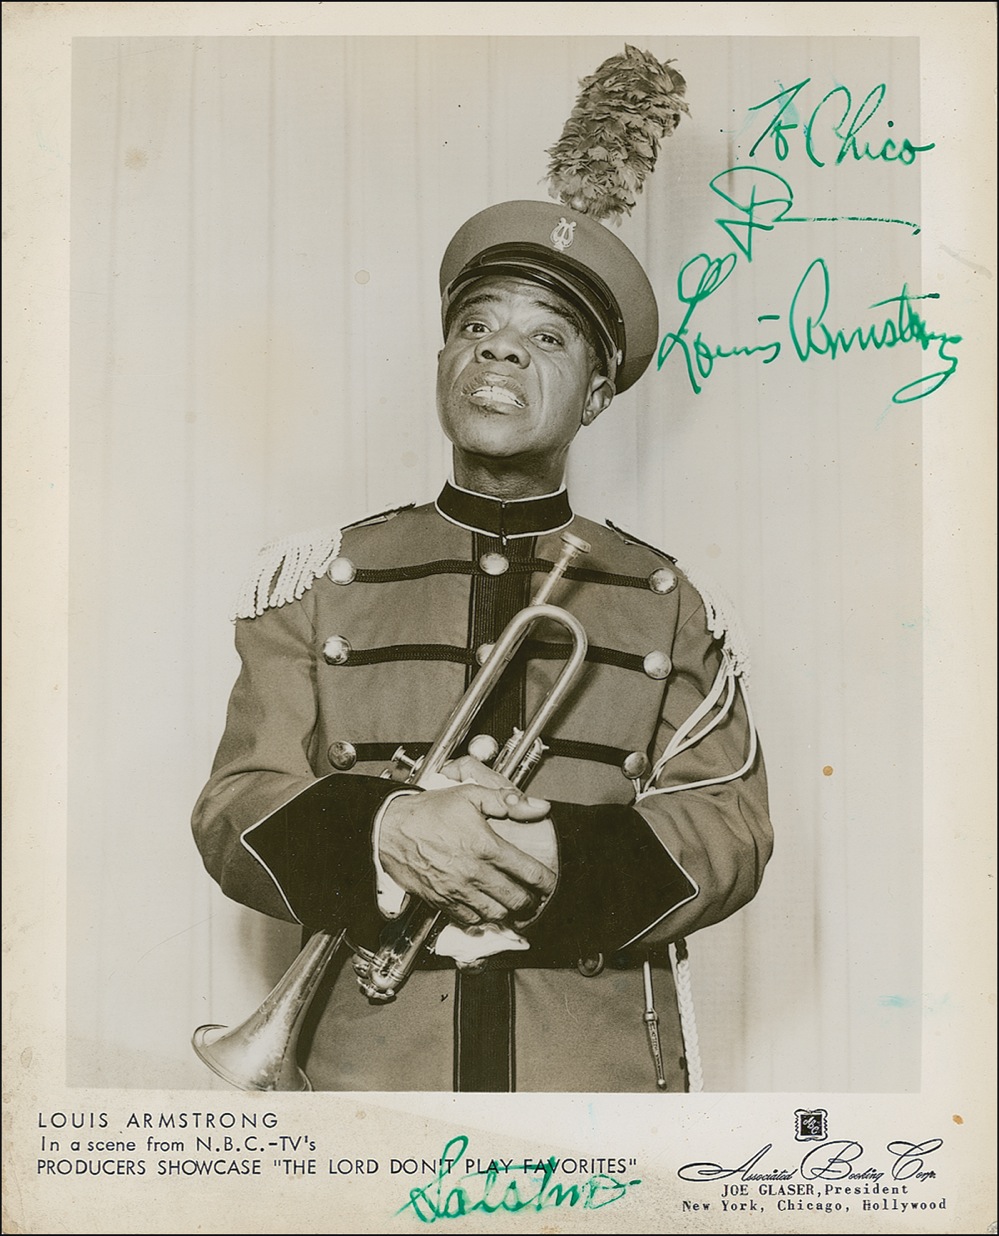 Lot #703 Louis Armstrong